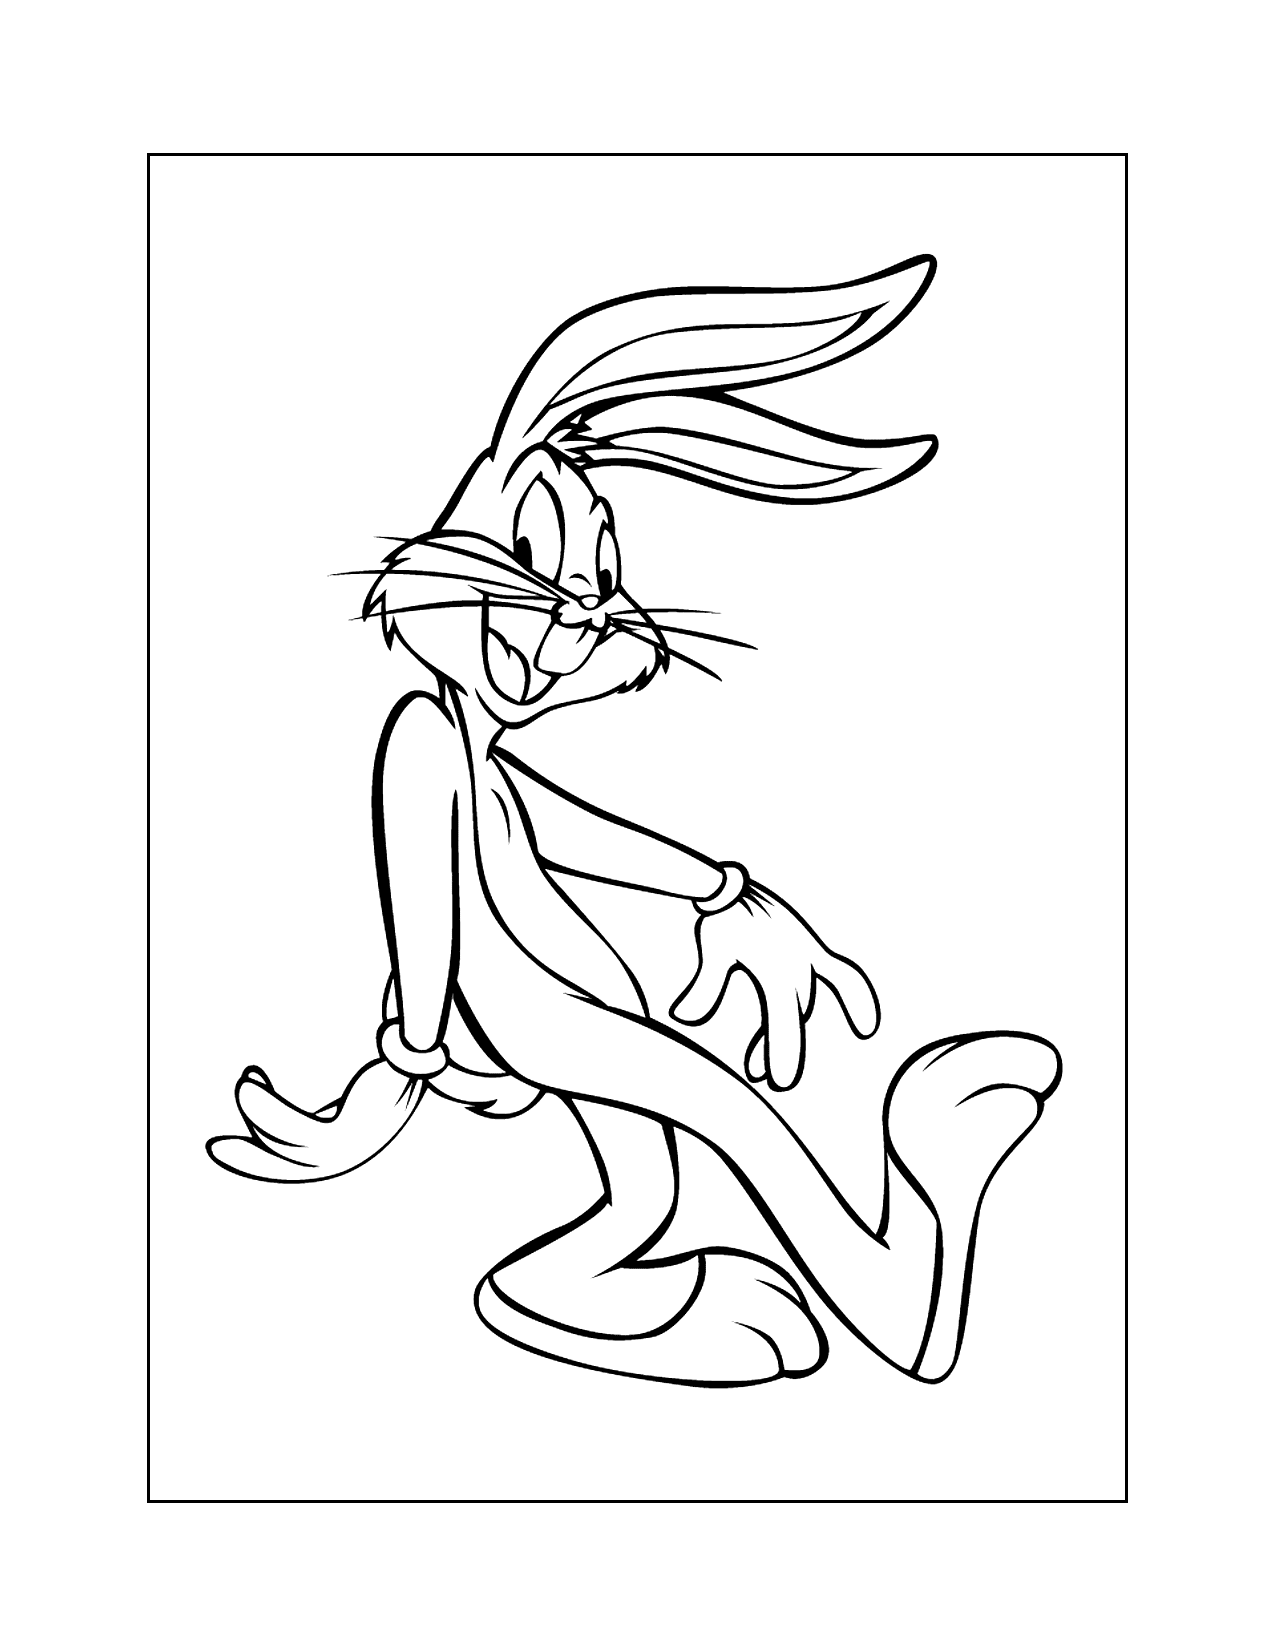 Funny Bugs Bunny Coloring Pages